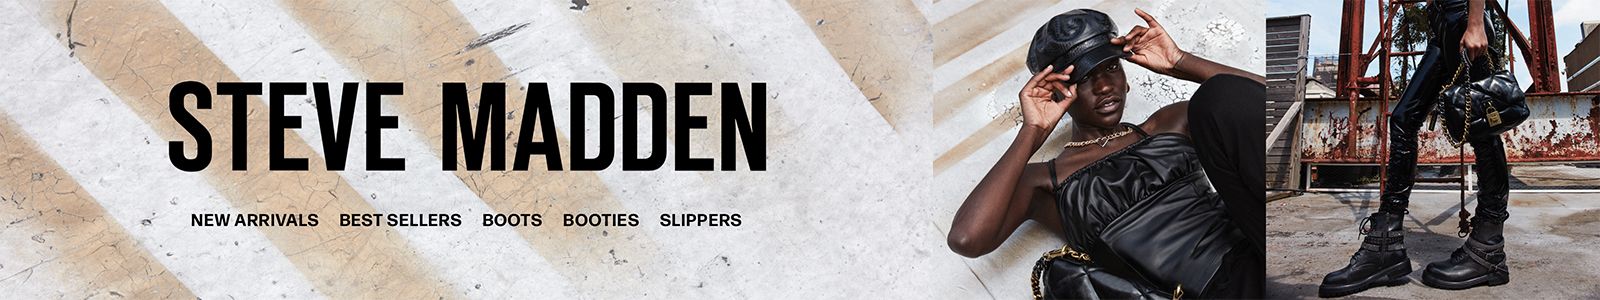 Steve Madden, New Arrivals, Best Sellers, Boots, Booties, Slippers